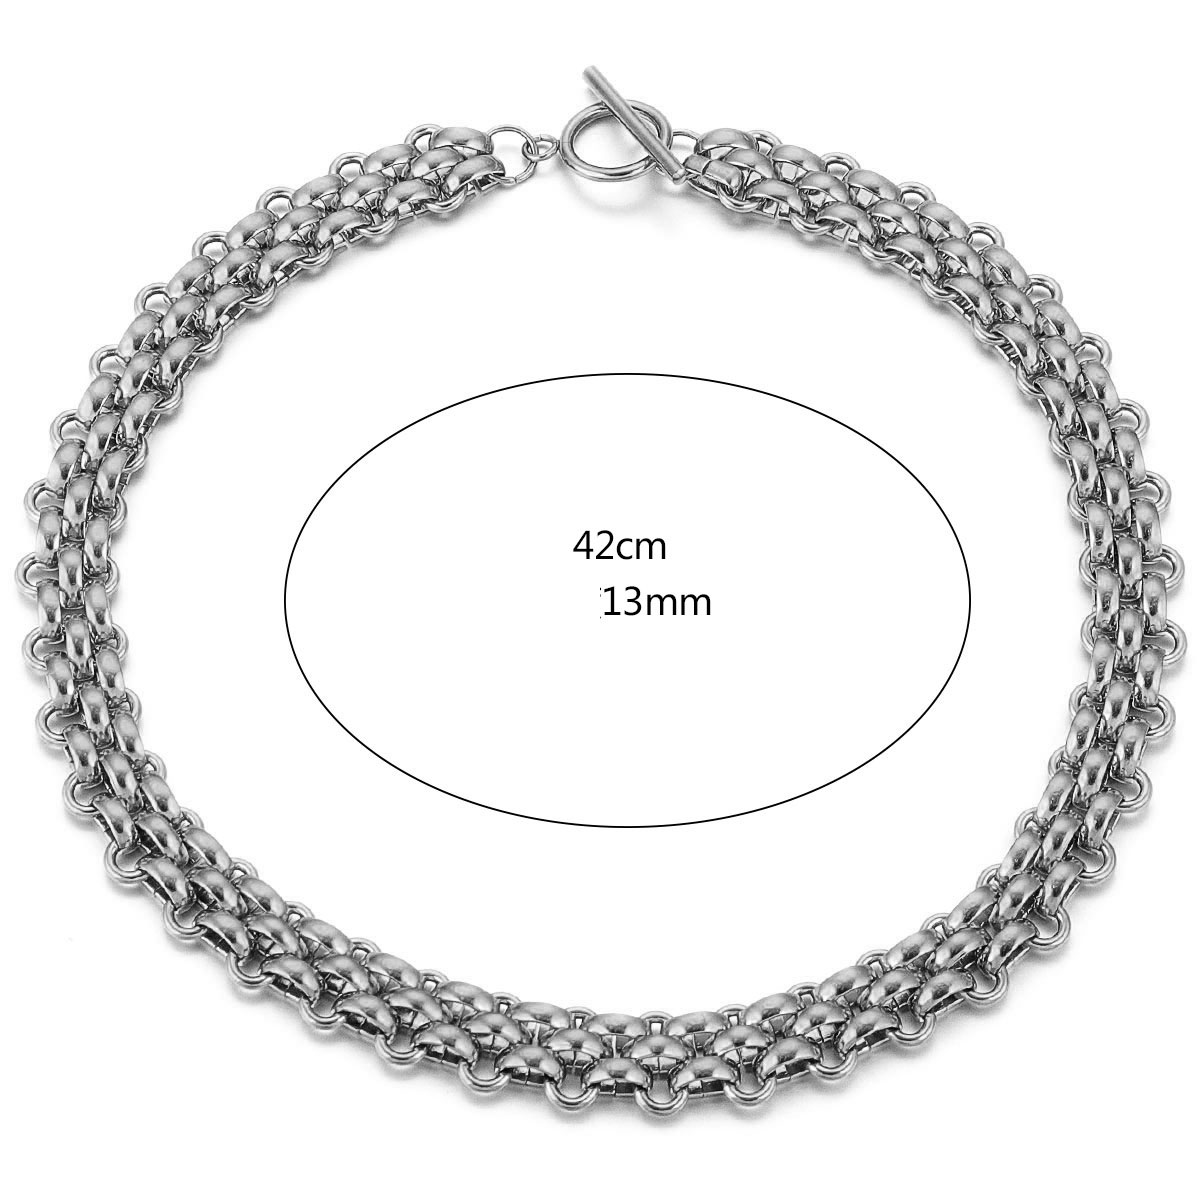 3:Smooth Necklace - Steel Colour